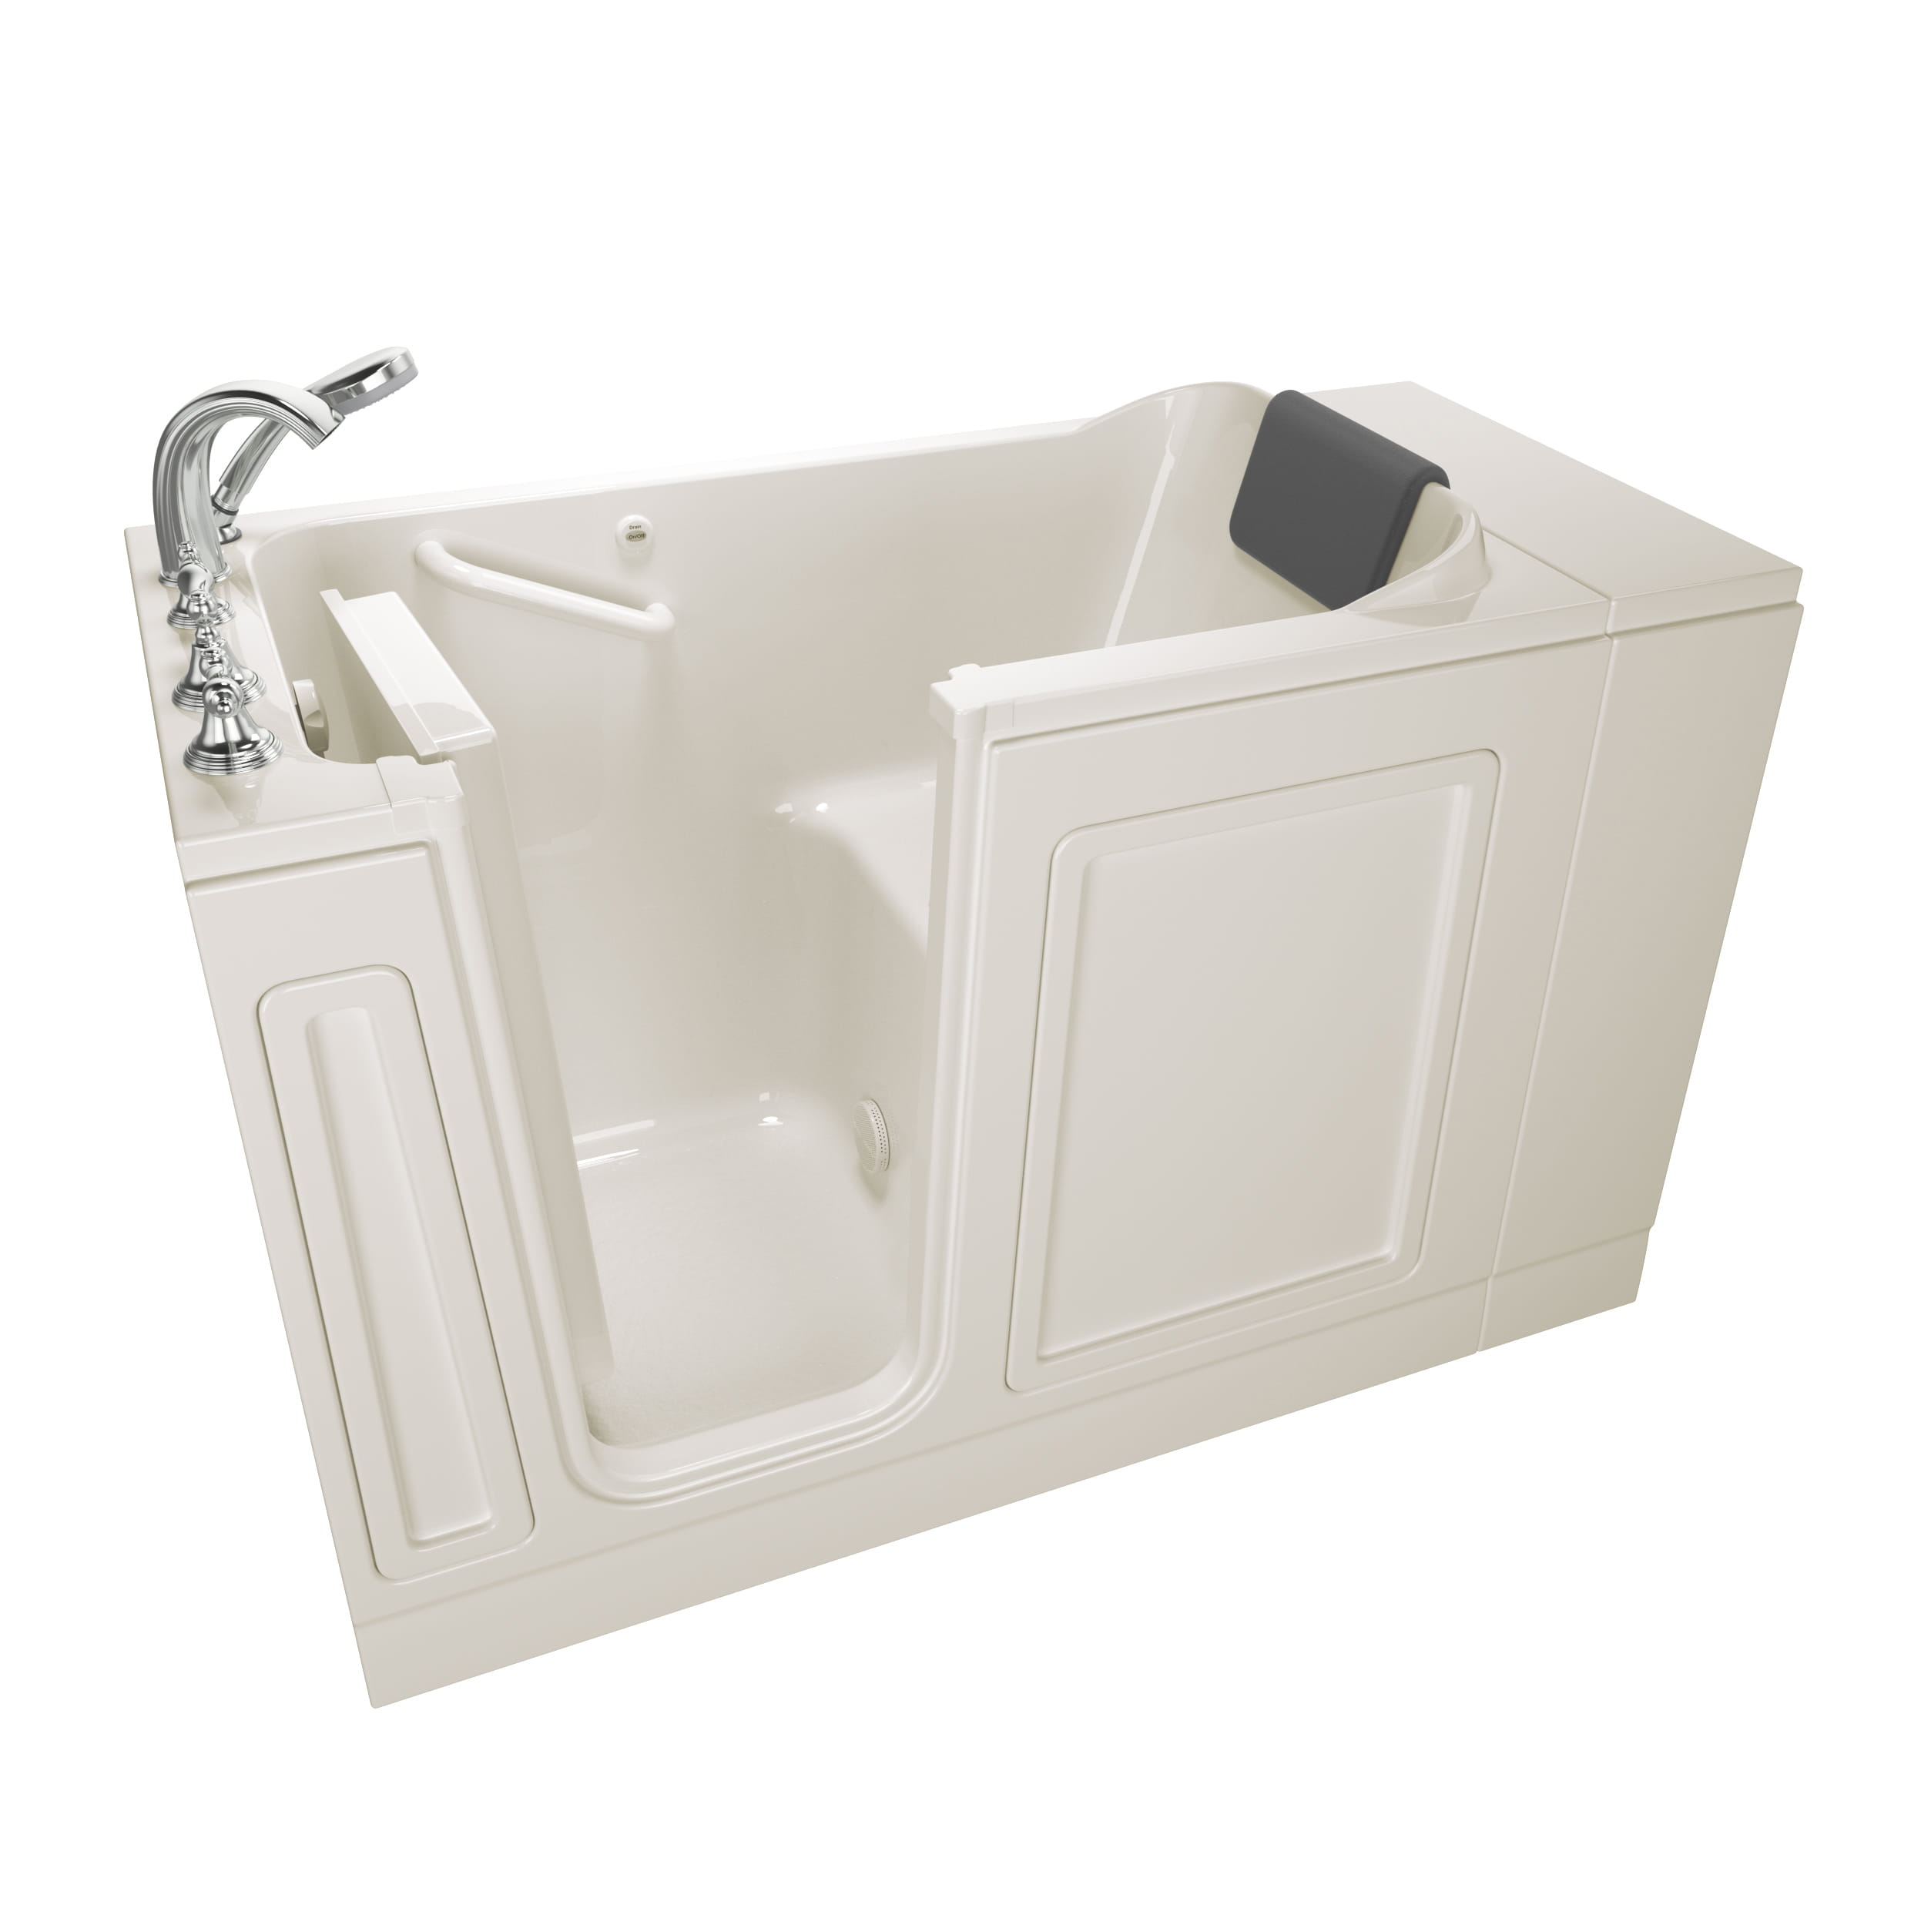 Acrylic Luxury Series 28 x 48 Inch Walk in Tub With Soaker System   Left Hand Drain With Faucet WIB LINEN